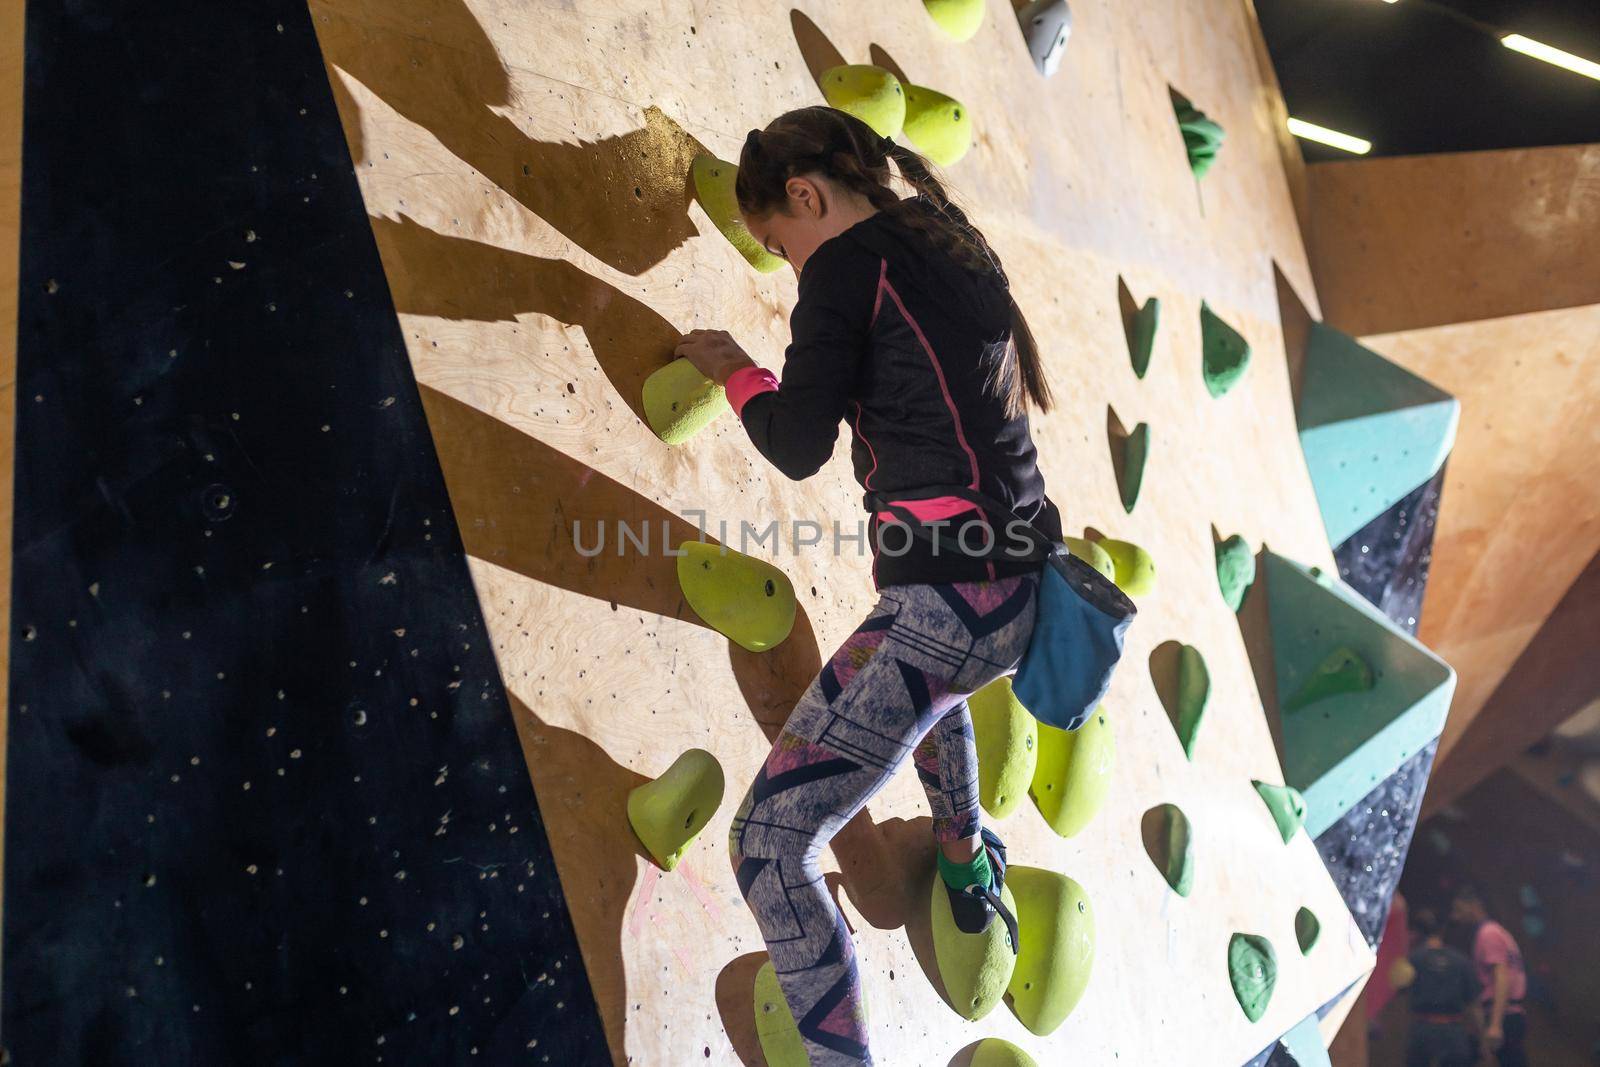 Junior Climber Girl shirt hanging on holds on climbing wall of indoor gym.